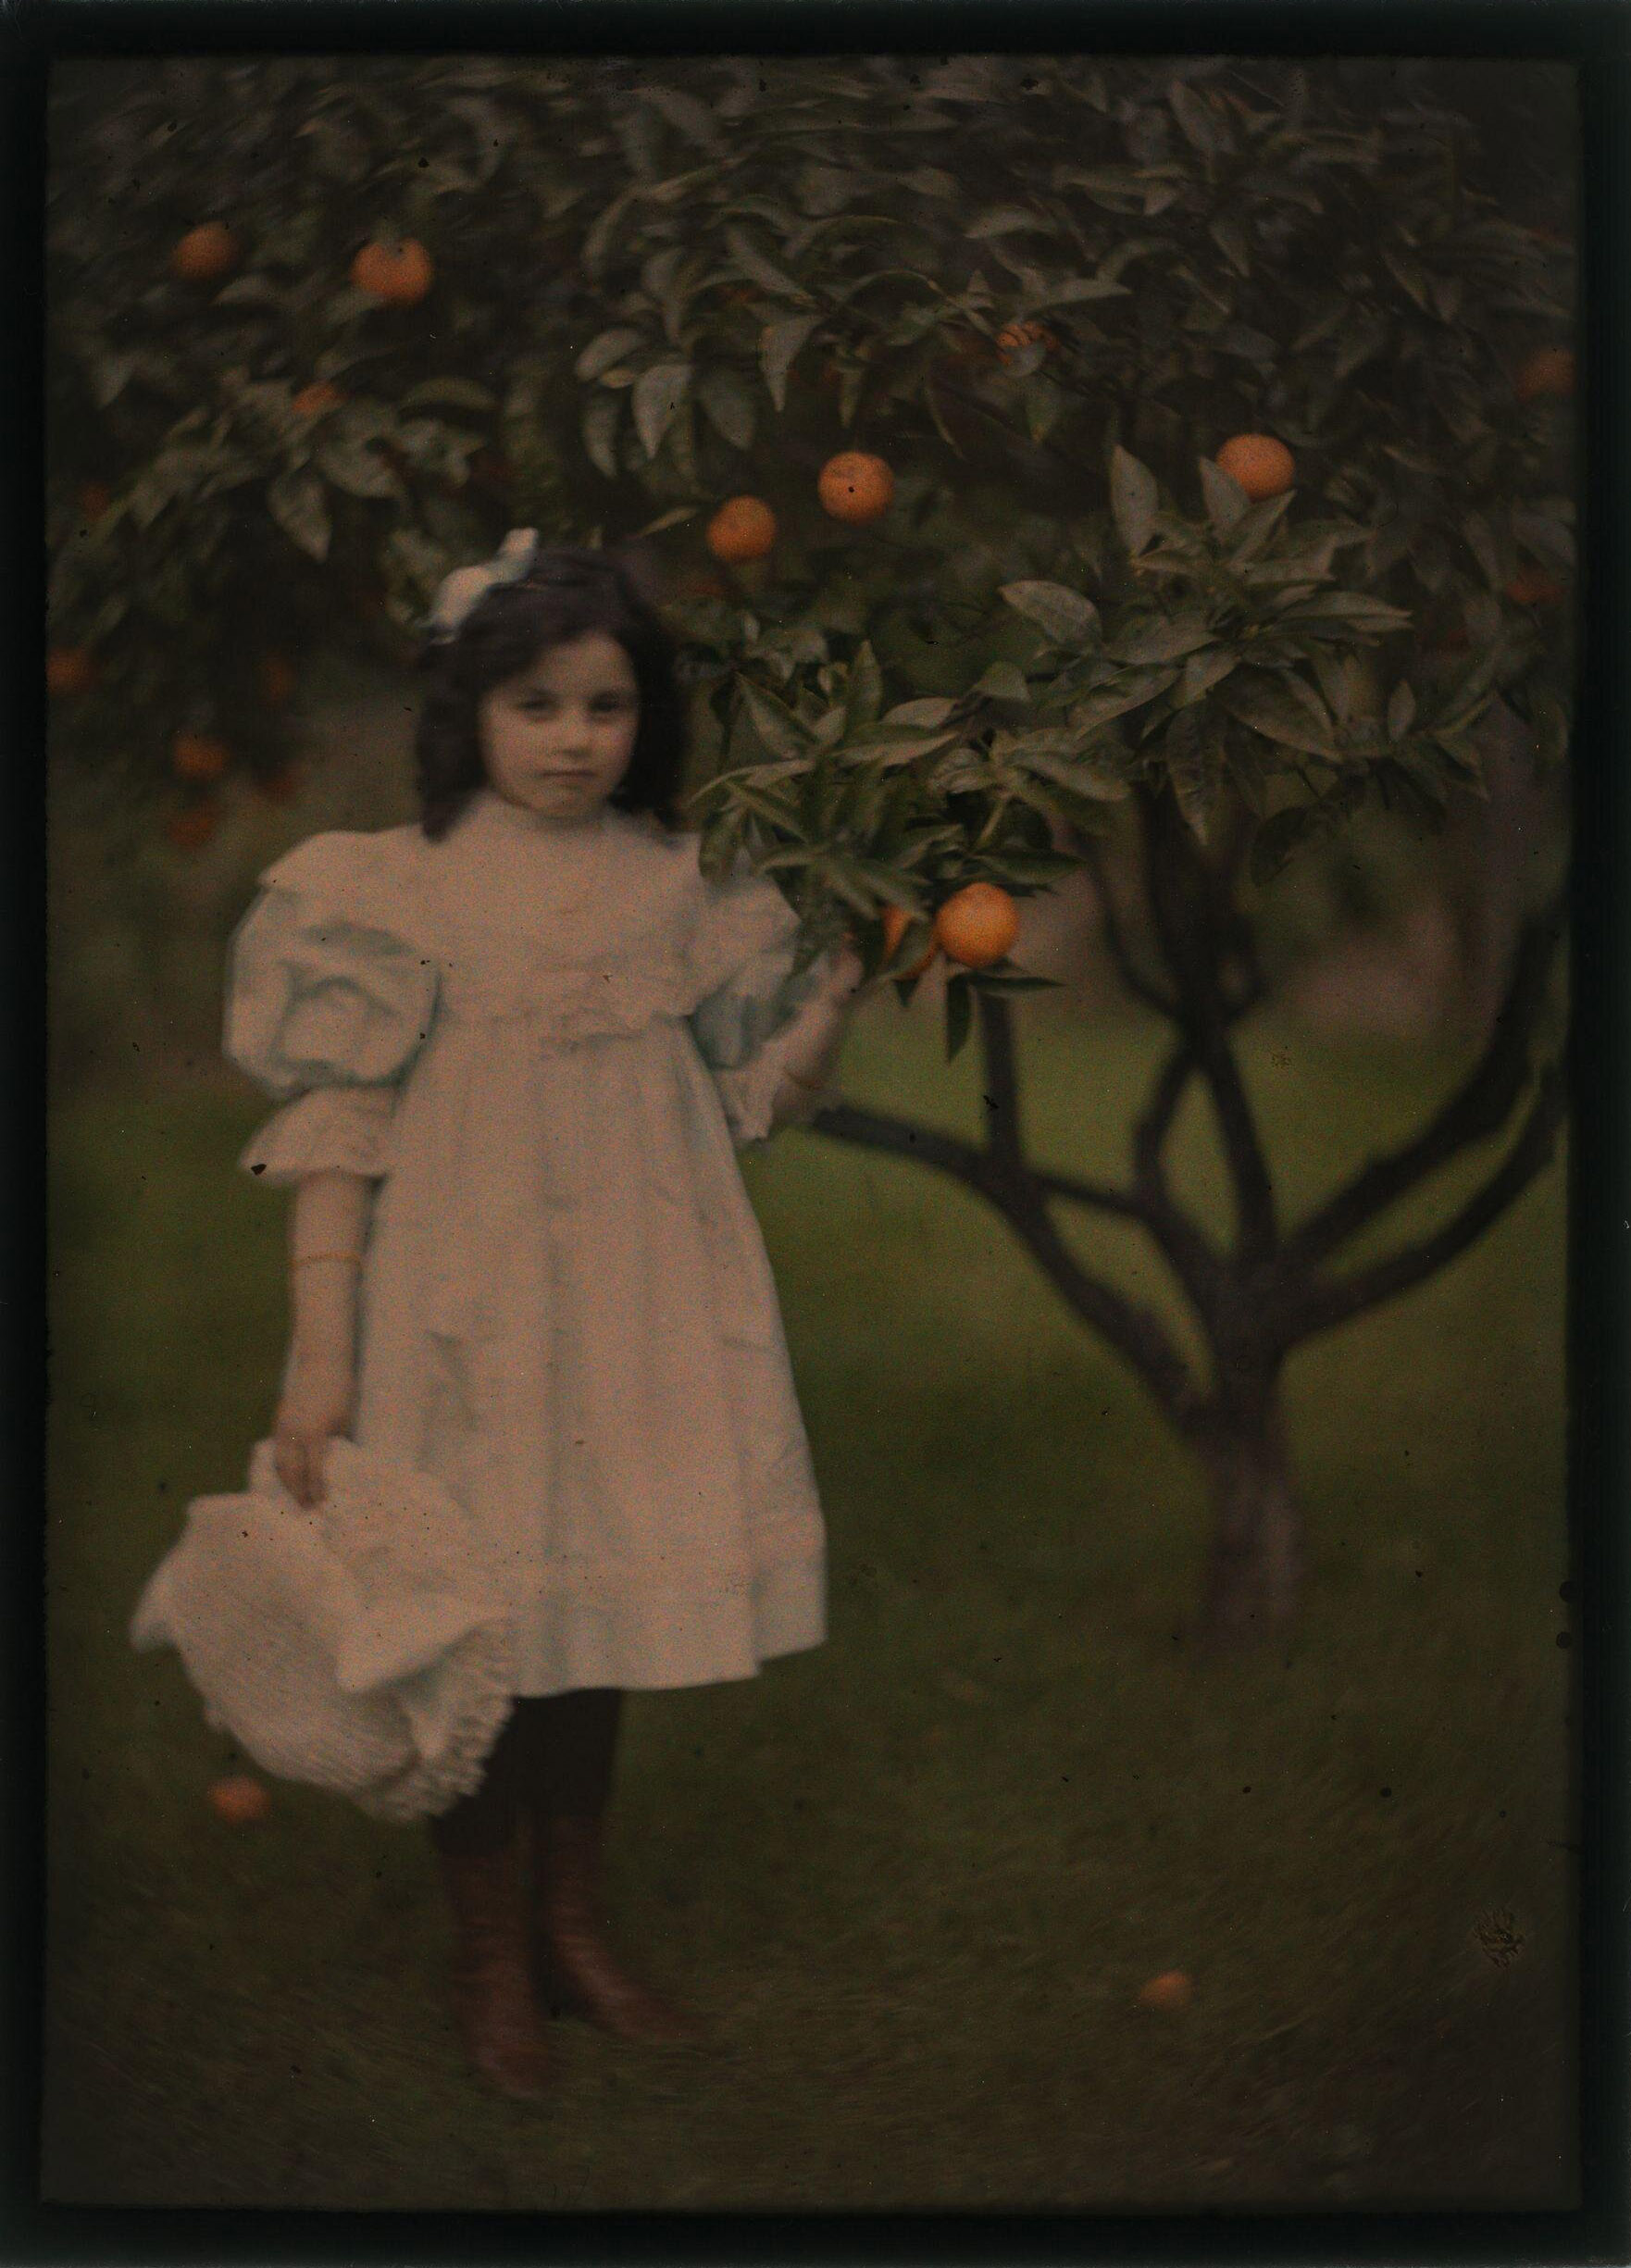 John Cimon Warburg :: 'Peggy by the Orange Tree', Autochrome, 1909. Photograph of a full length portrait of Warburg's daughter Peggy standing beside an orange tree. She wears a white dress and holds a white hat in her hand. She holds onto the orange tree with her other hand. | src V&A Museum